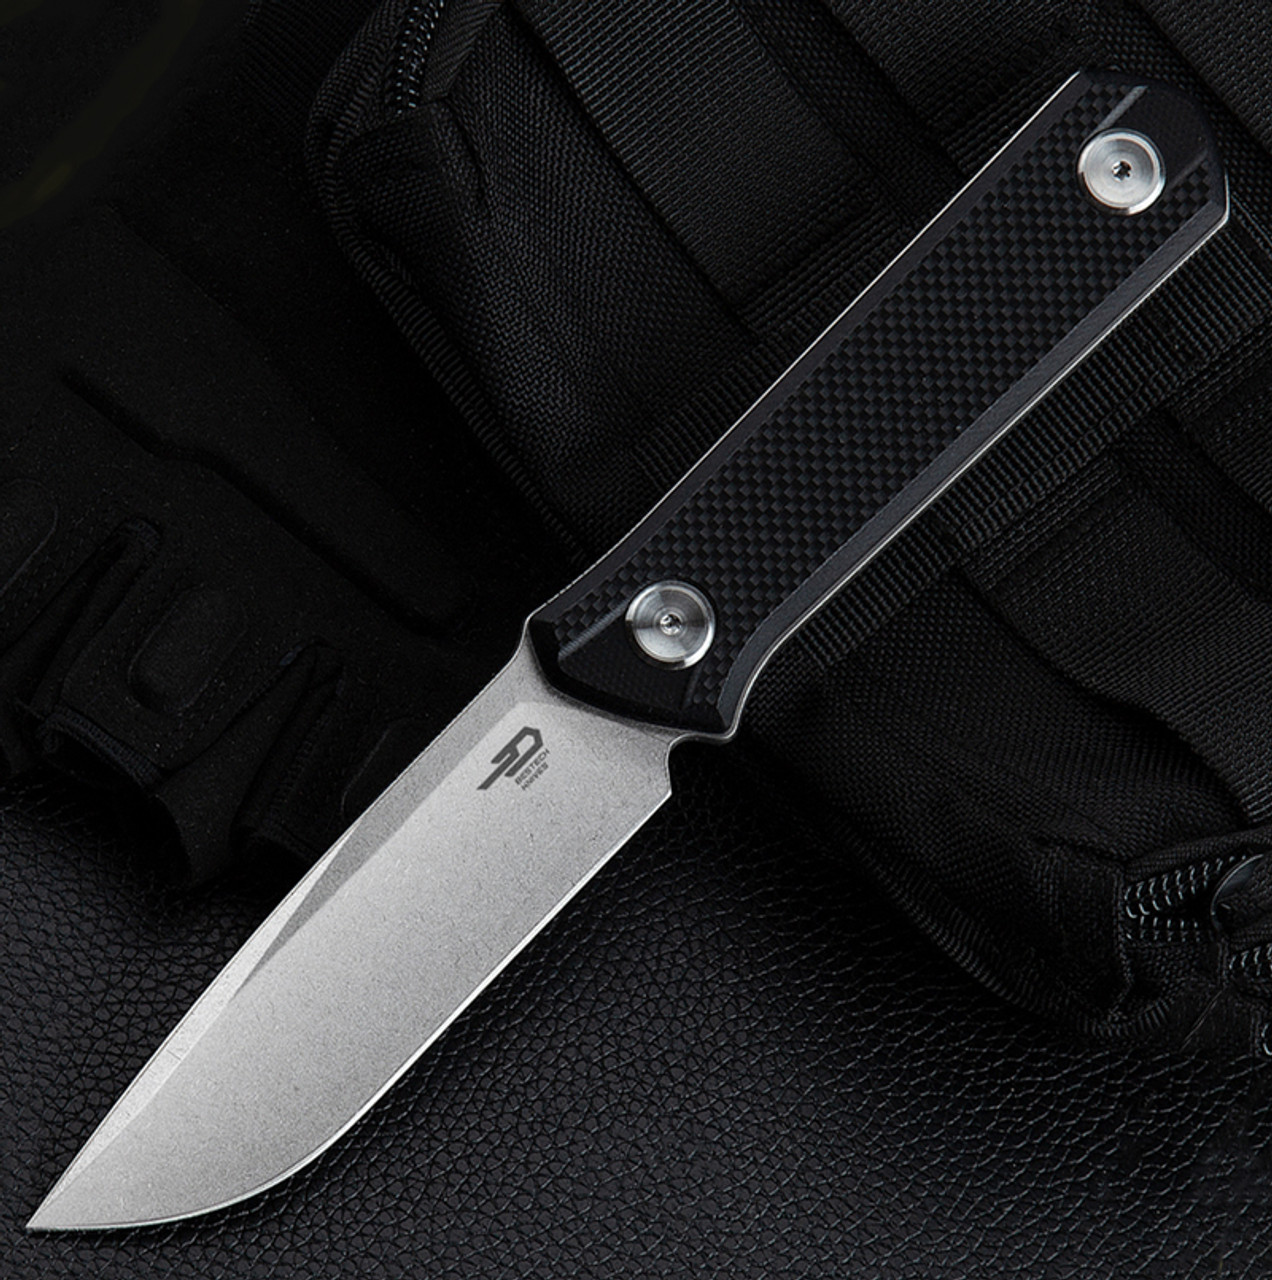 Bestech Hedron (BFK02A) - 3.75" D2 Stonewashed Drop Point Fixed Blade, Black G-10 Handle, Black Kydex Sheath